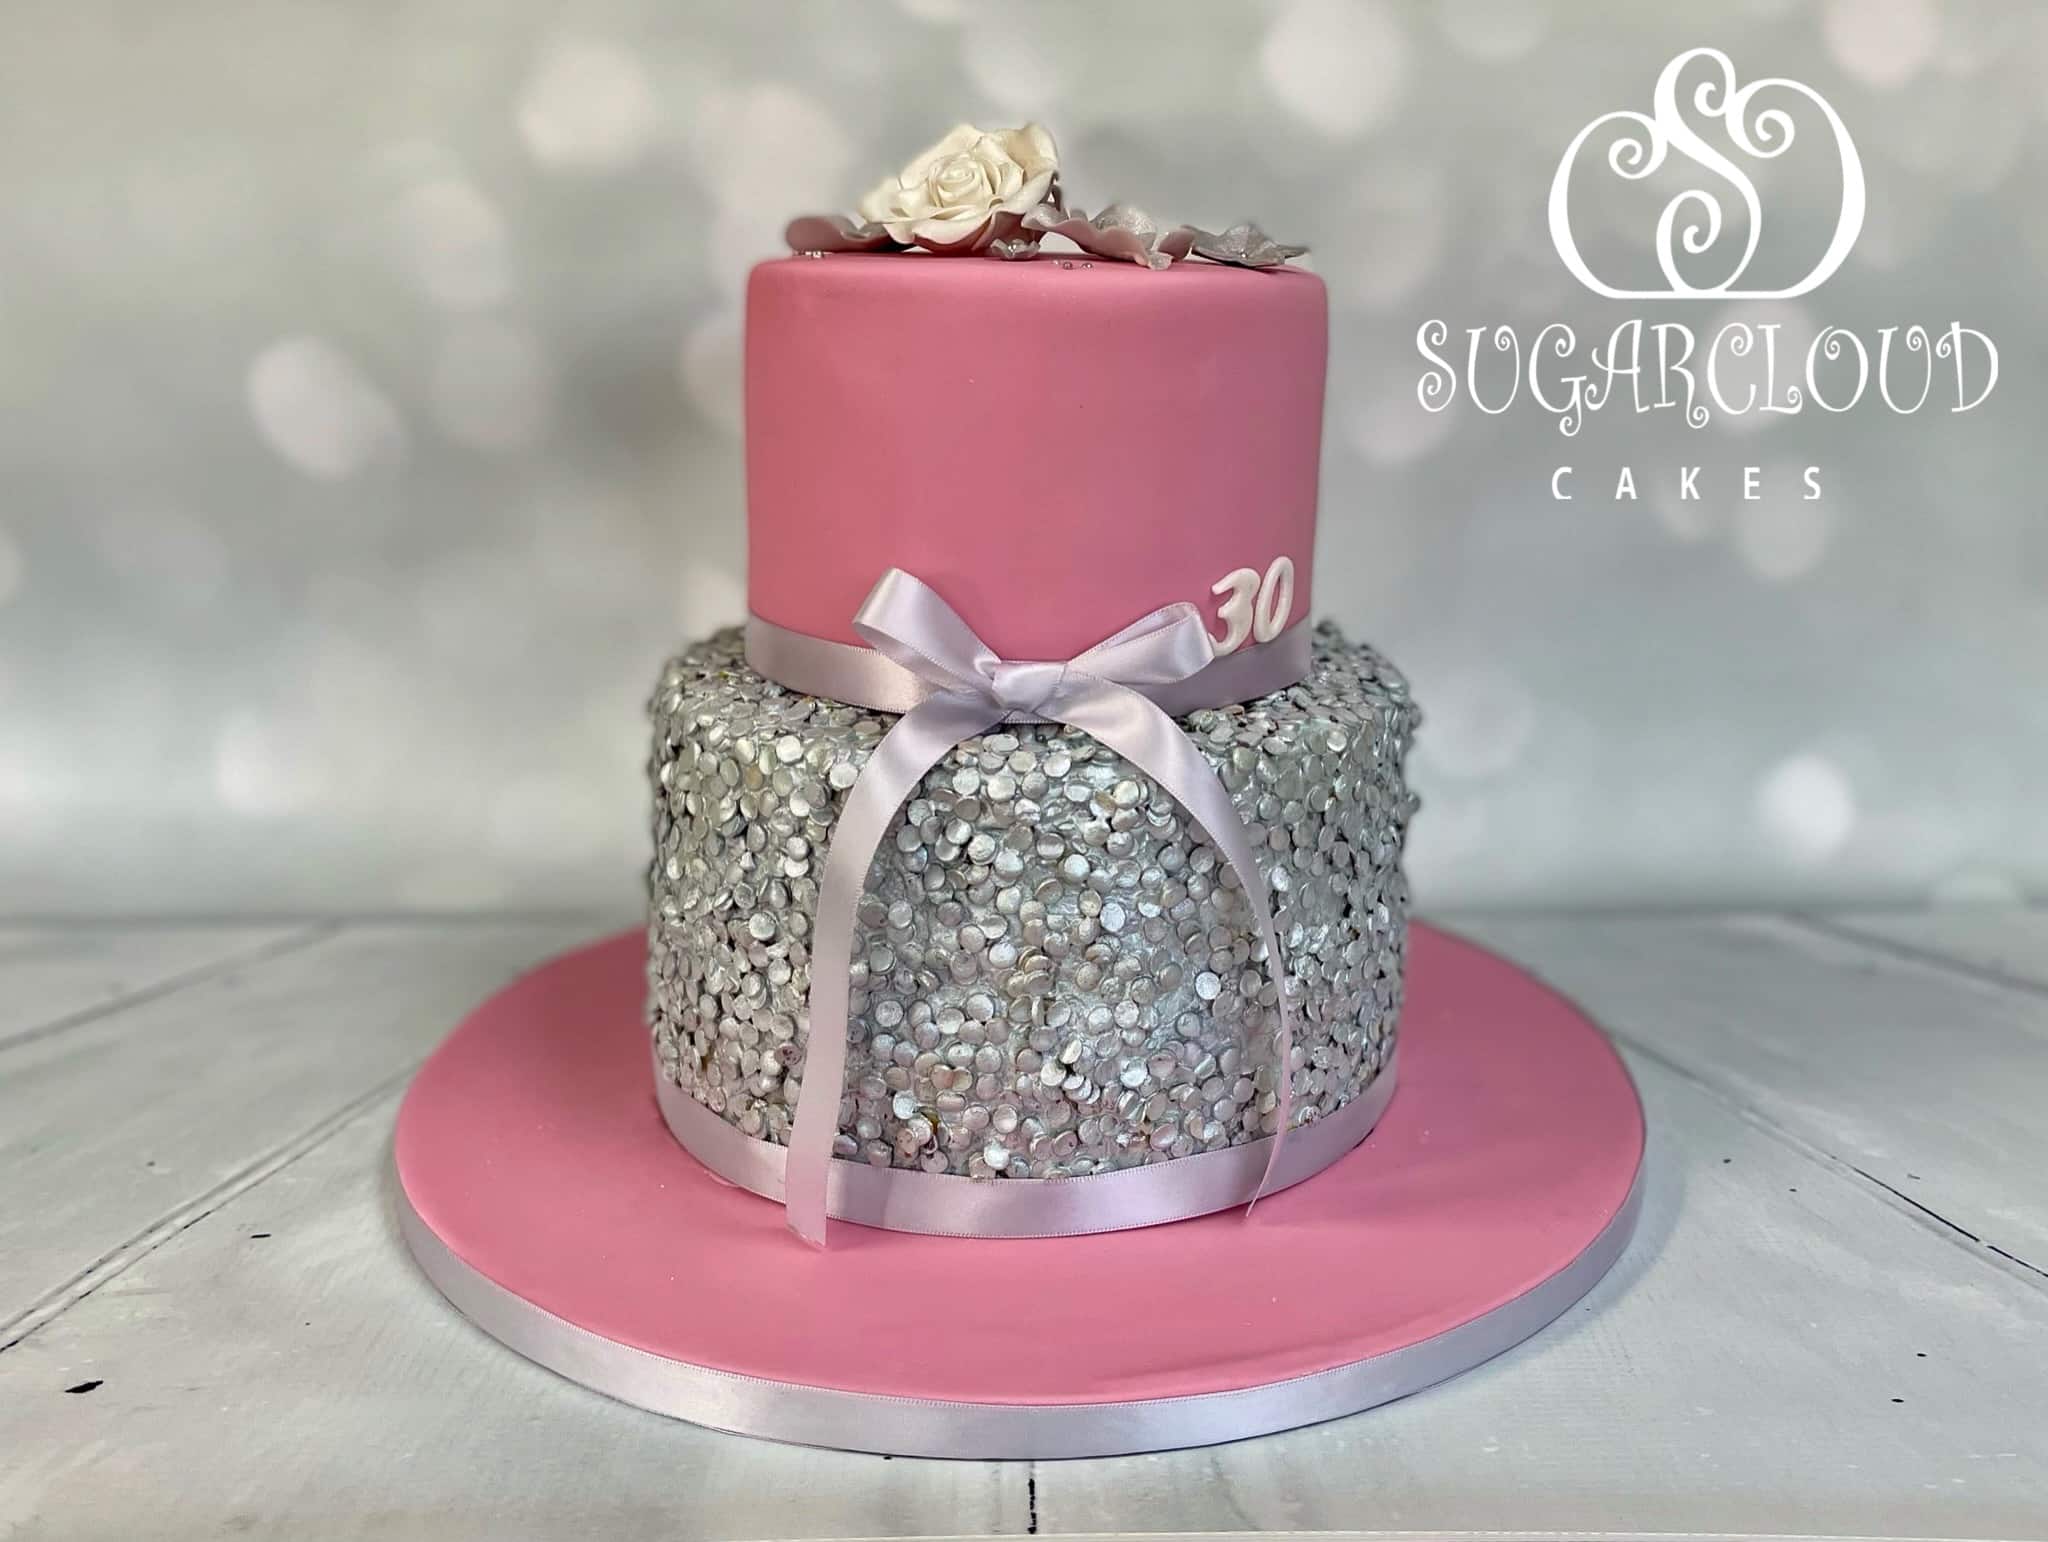 Taylor's Birthday Bling - Decorated Cake by skrinklez - CakesDecor